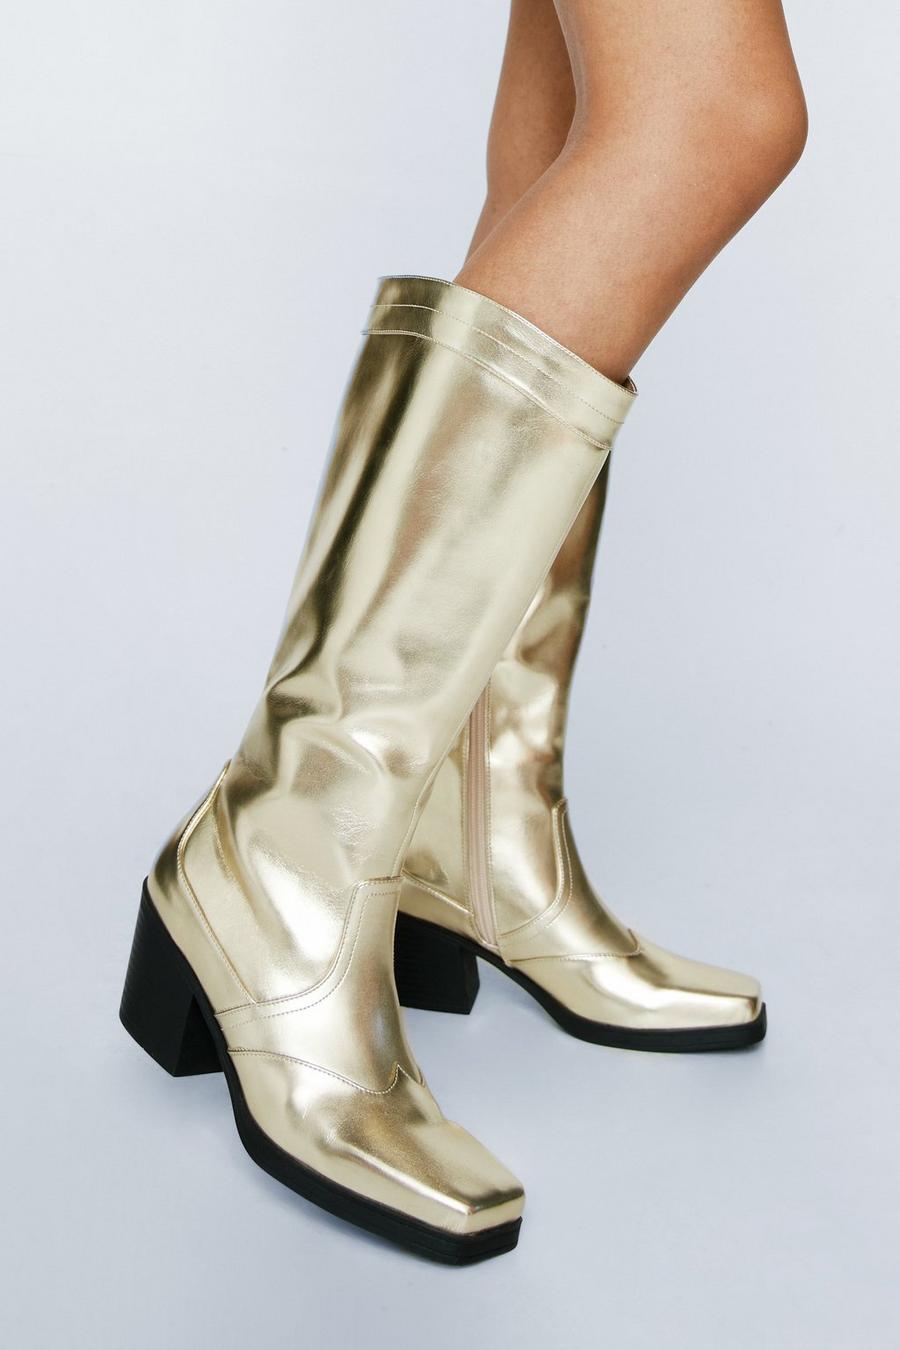 Faux Leather Metallic Square Toe Cowboy Knee High Boot 